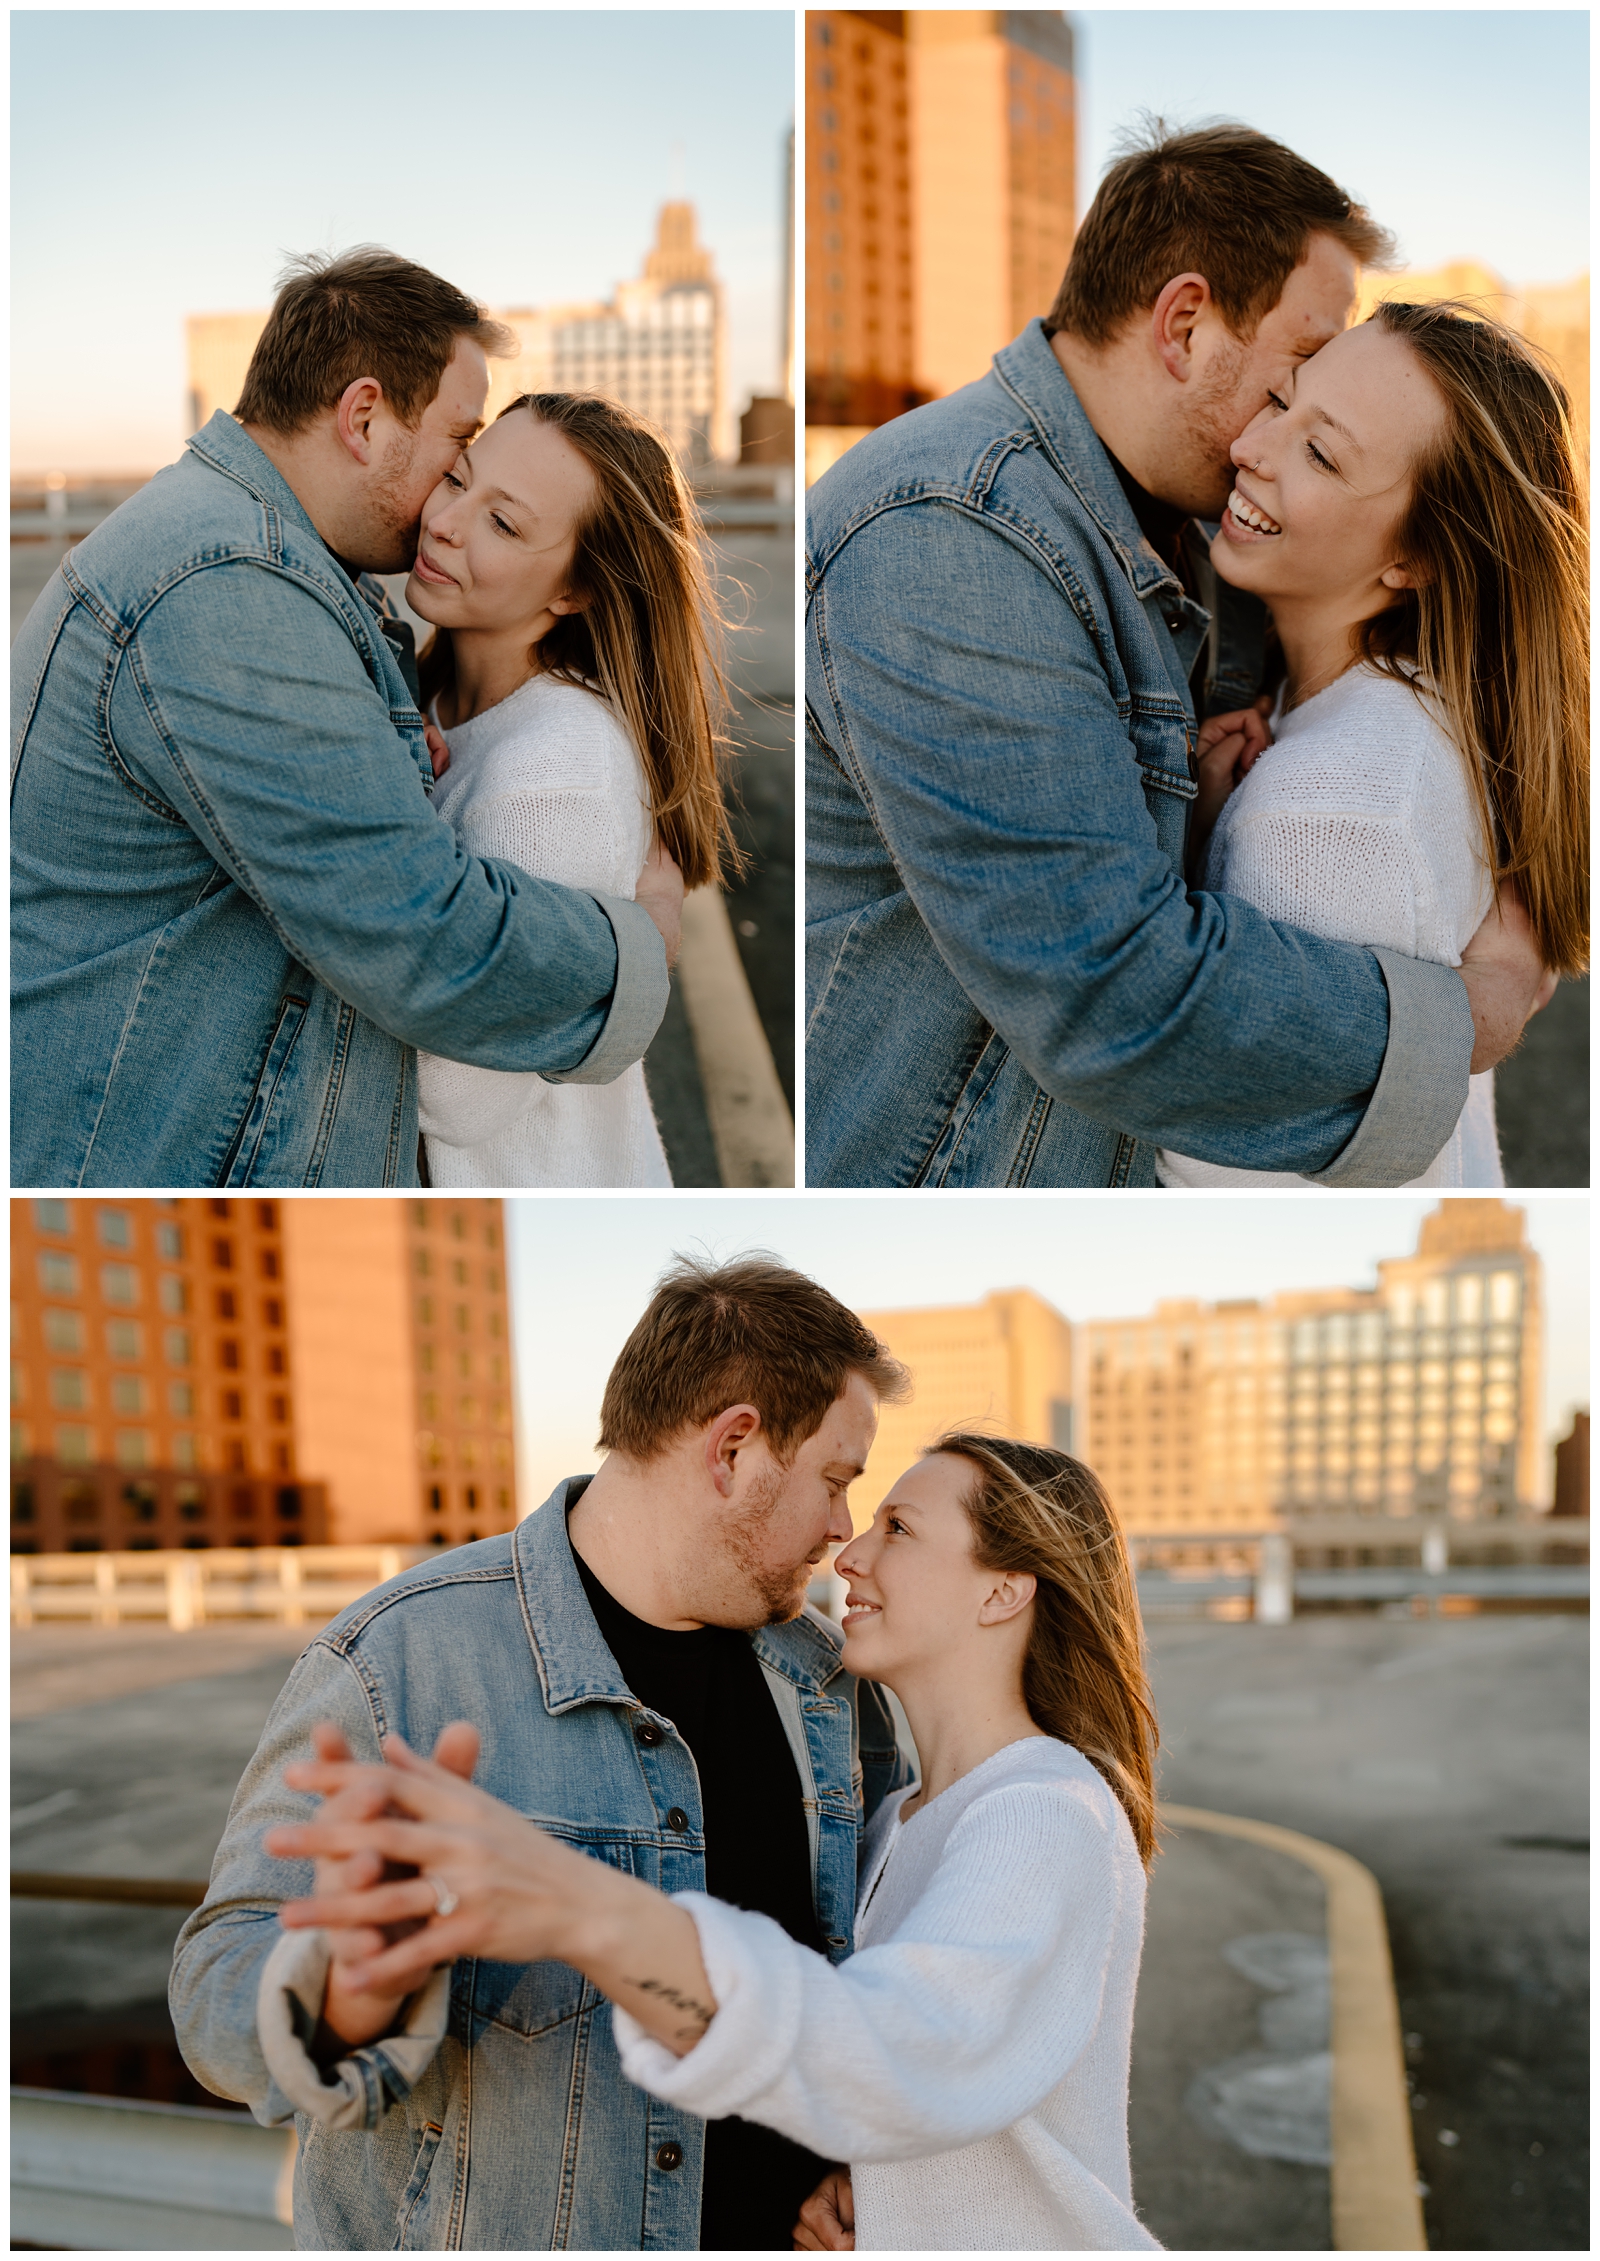 Engagement photos with city views during golden hour. Downtown Winston-Salem, NC